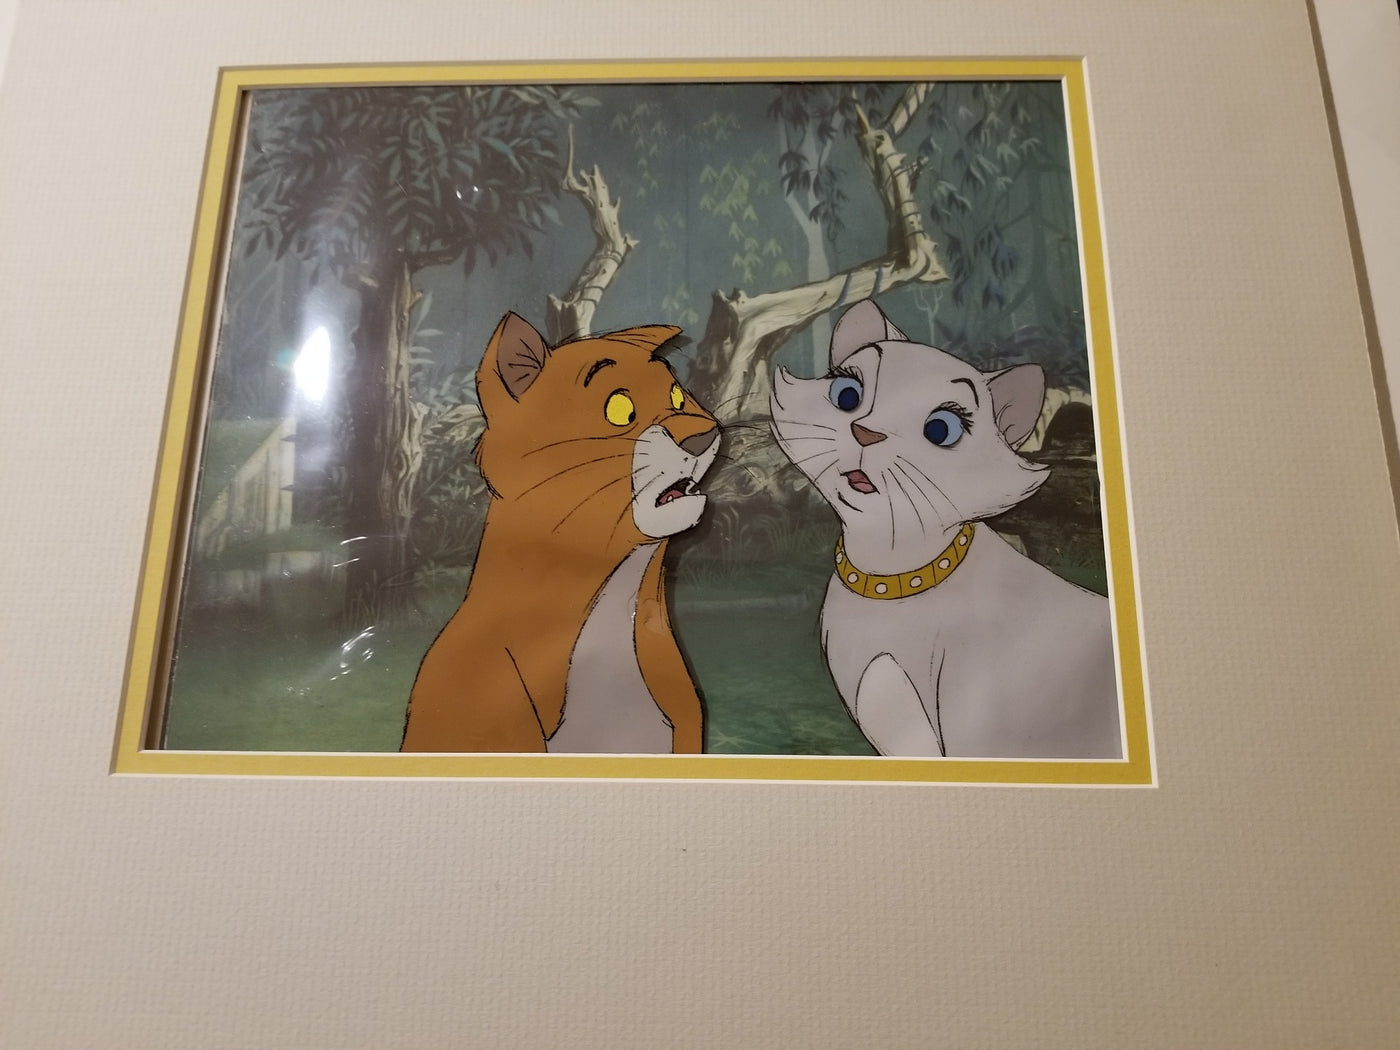 Original Walt Disney Production Cel from The Aristocats featuring Thomas O'Malley and Duchess